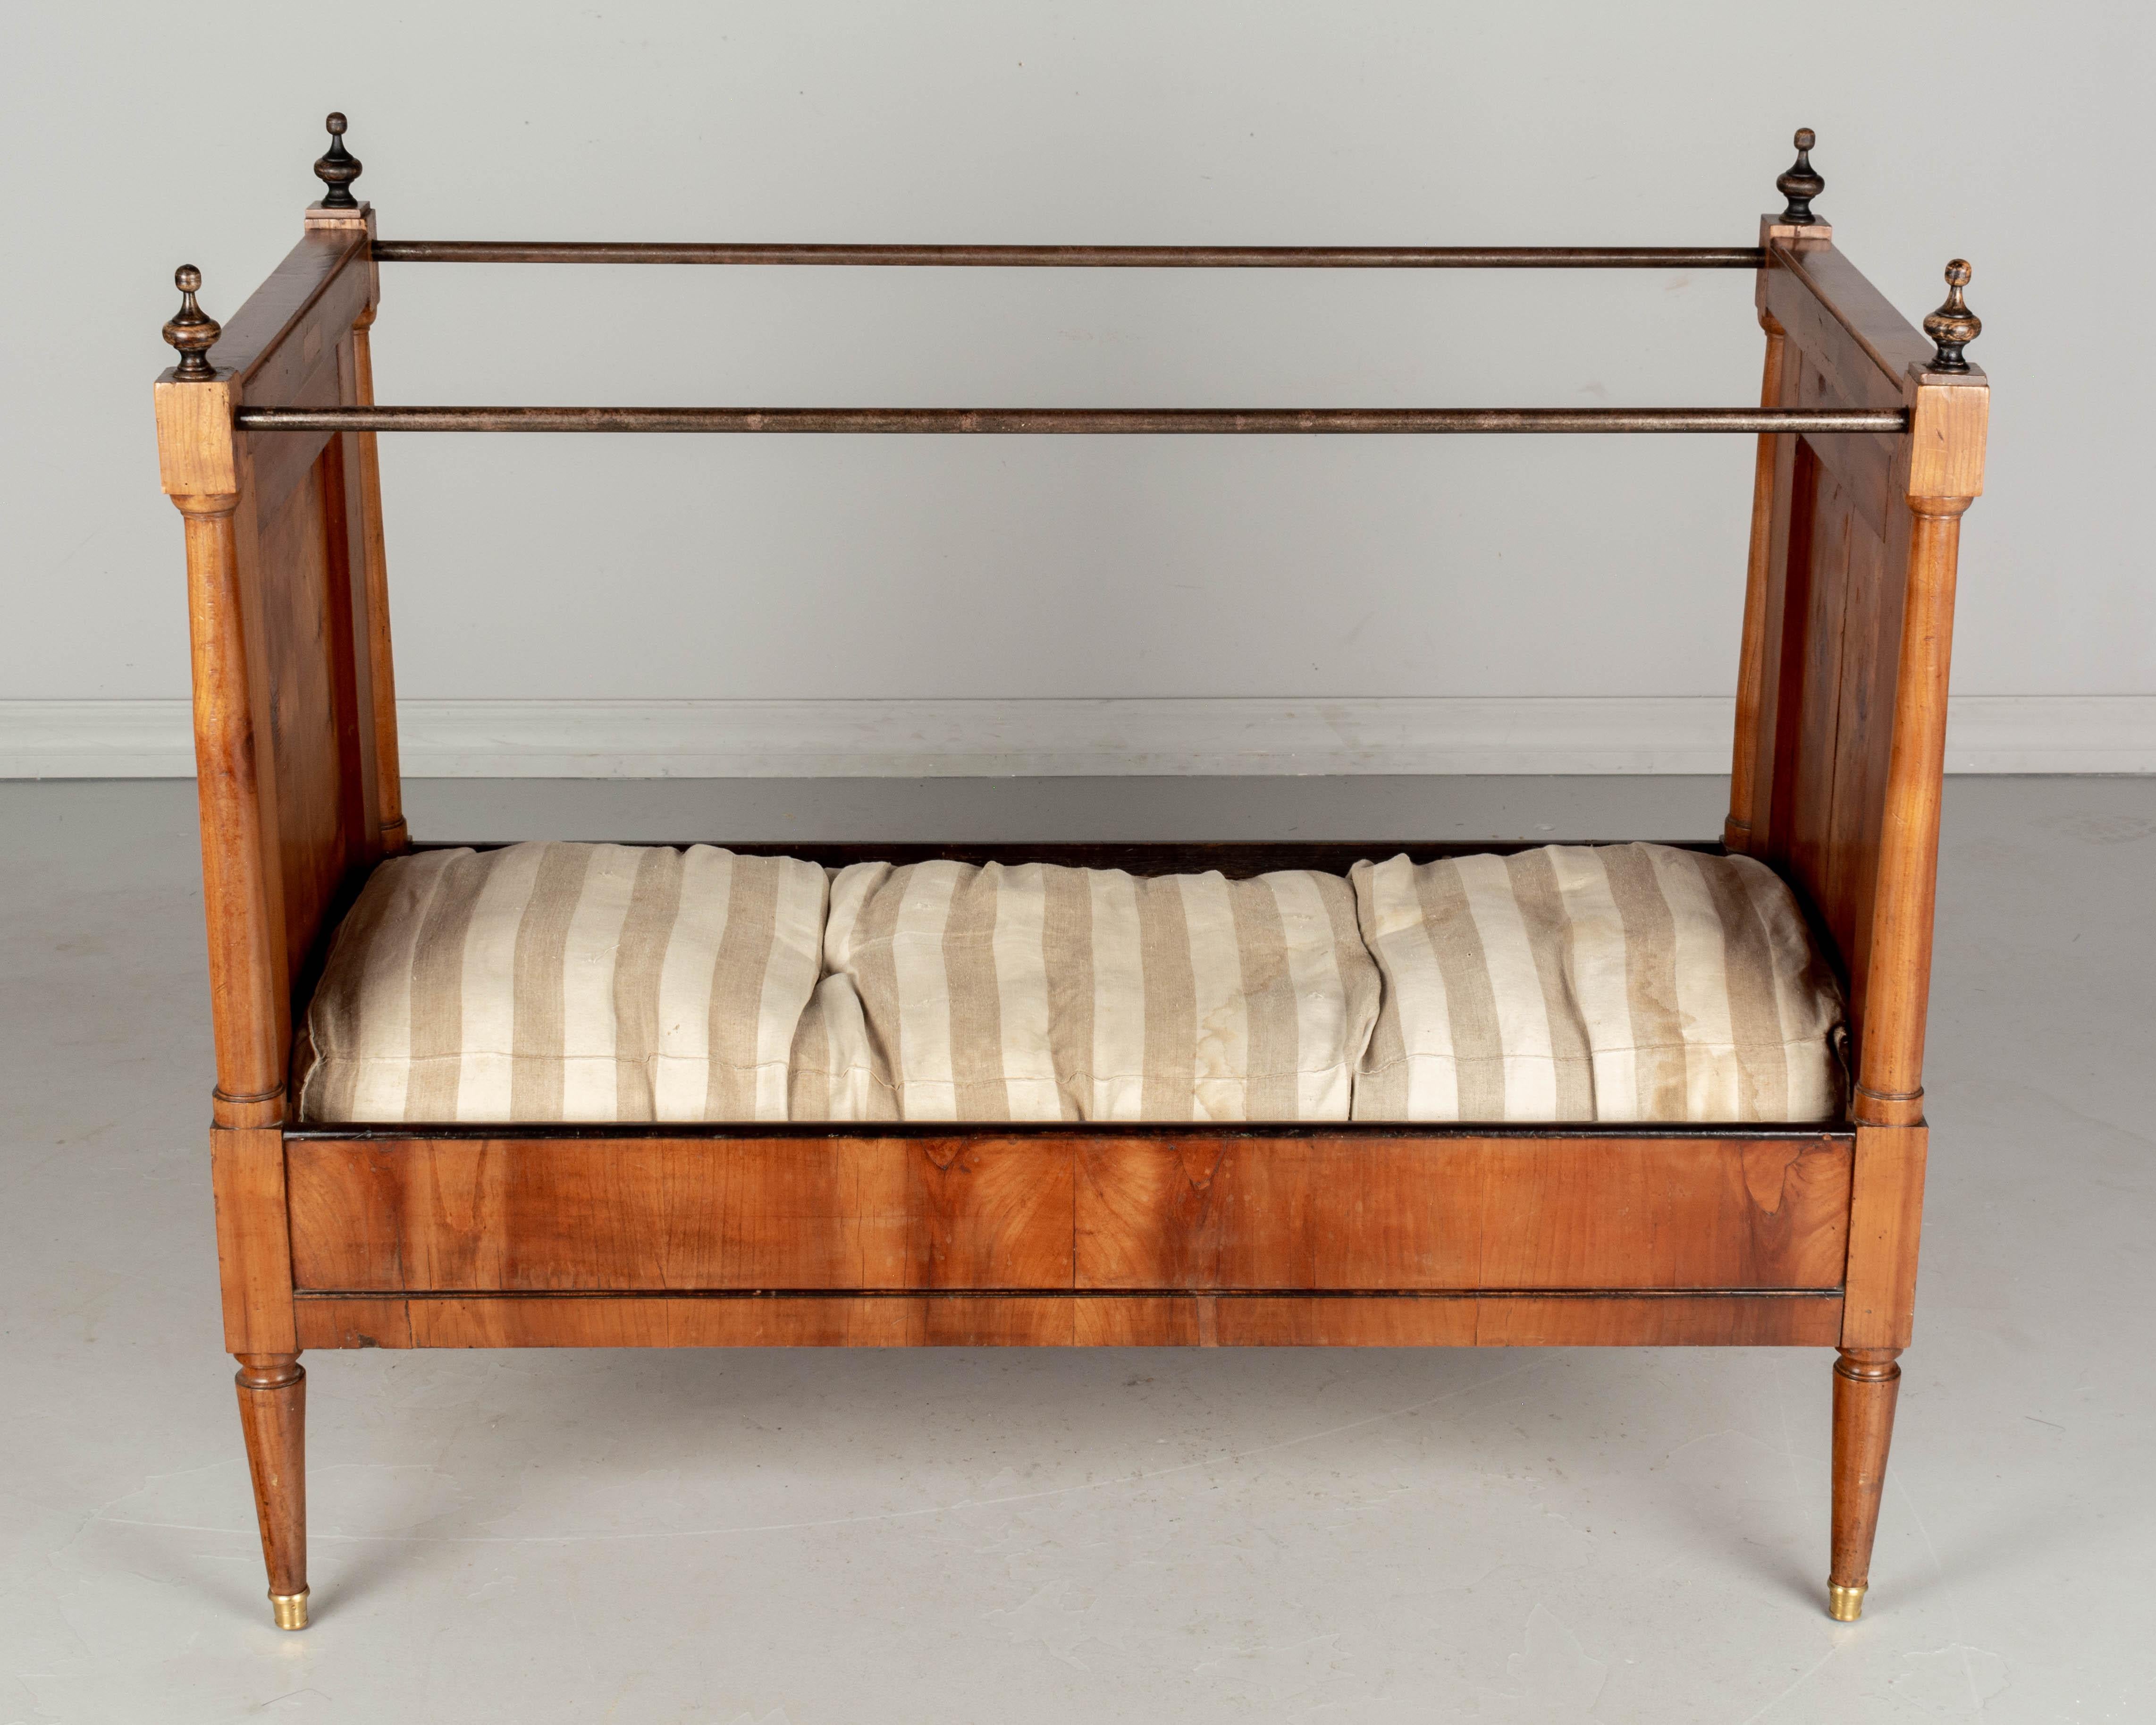 Hand-Crafted 19th Century French Napoleon III Child's Bed For Sale